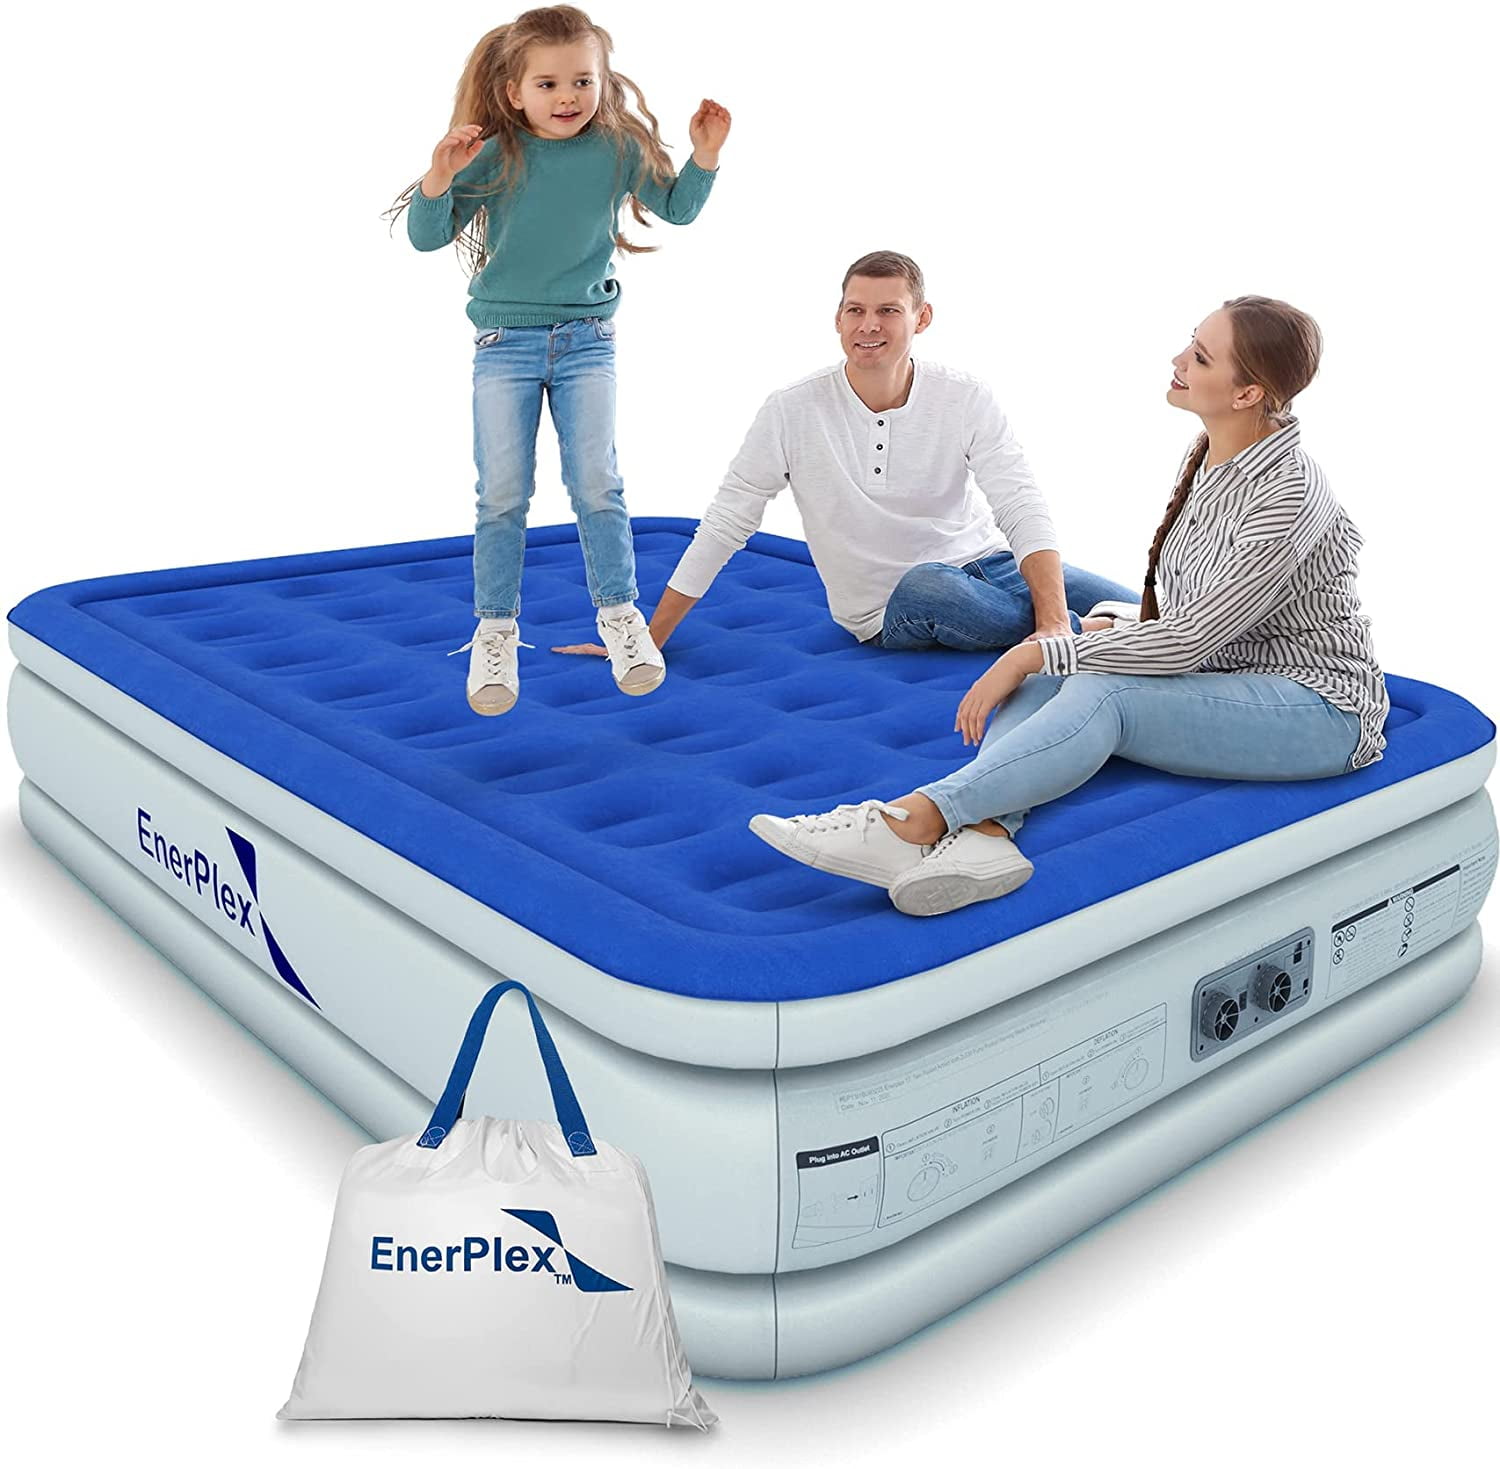 AIRELAX Queen Air Mattress Odor Free, Blow Up Mattress Built in Automatic  Pump, Adjustable Double High Air Bed Inflatable to 18 Inches for Camping